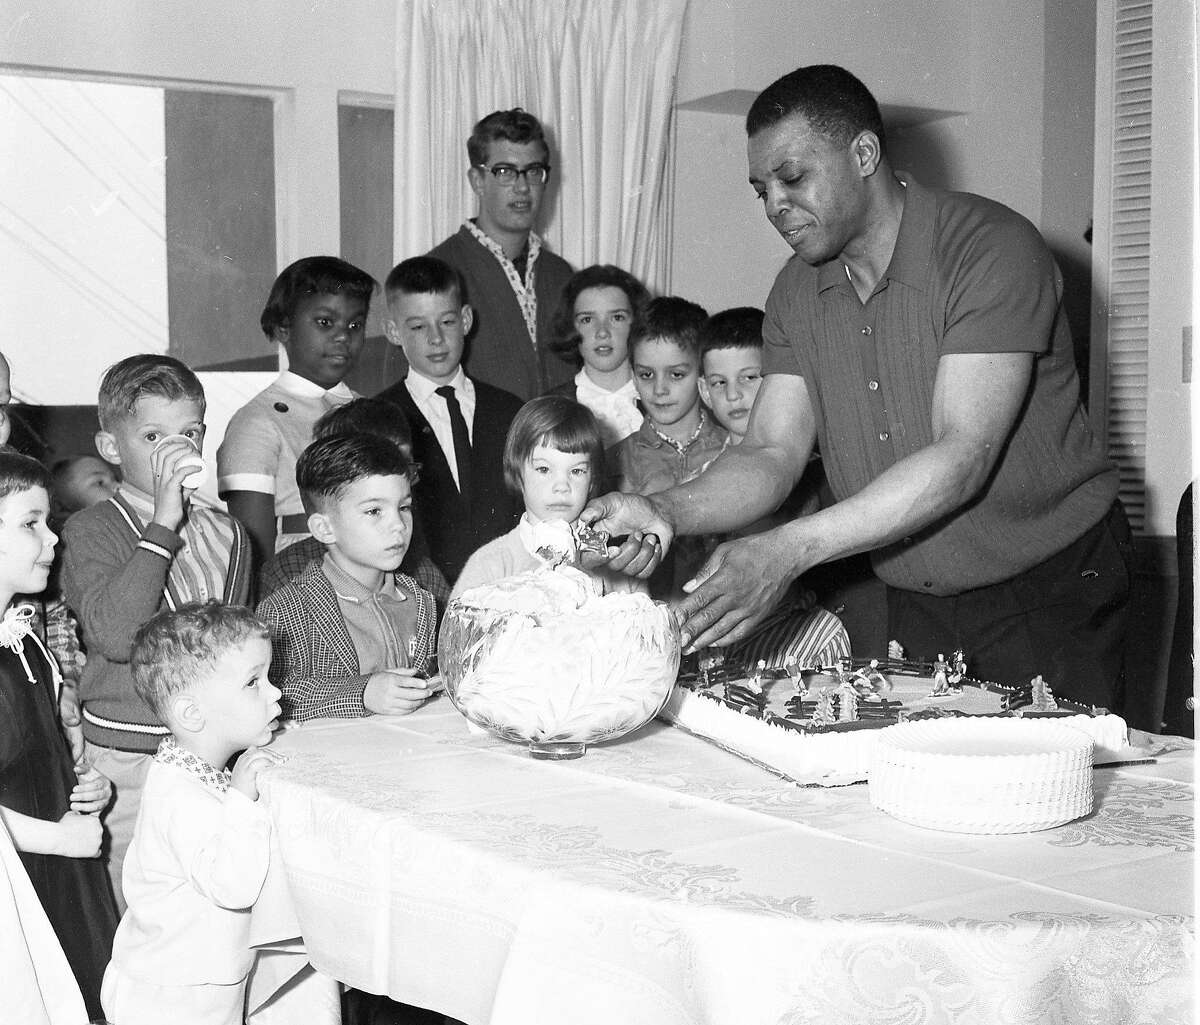 Feb. 16. 1963: Willie Mays serves ice cream during a party at the San Francisco Giants player's San Francisco home.